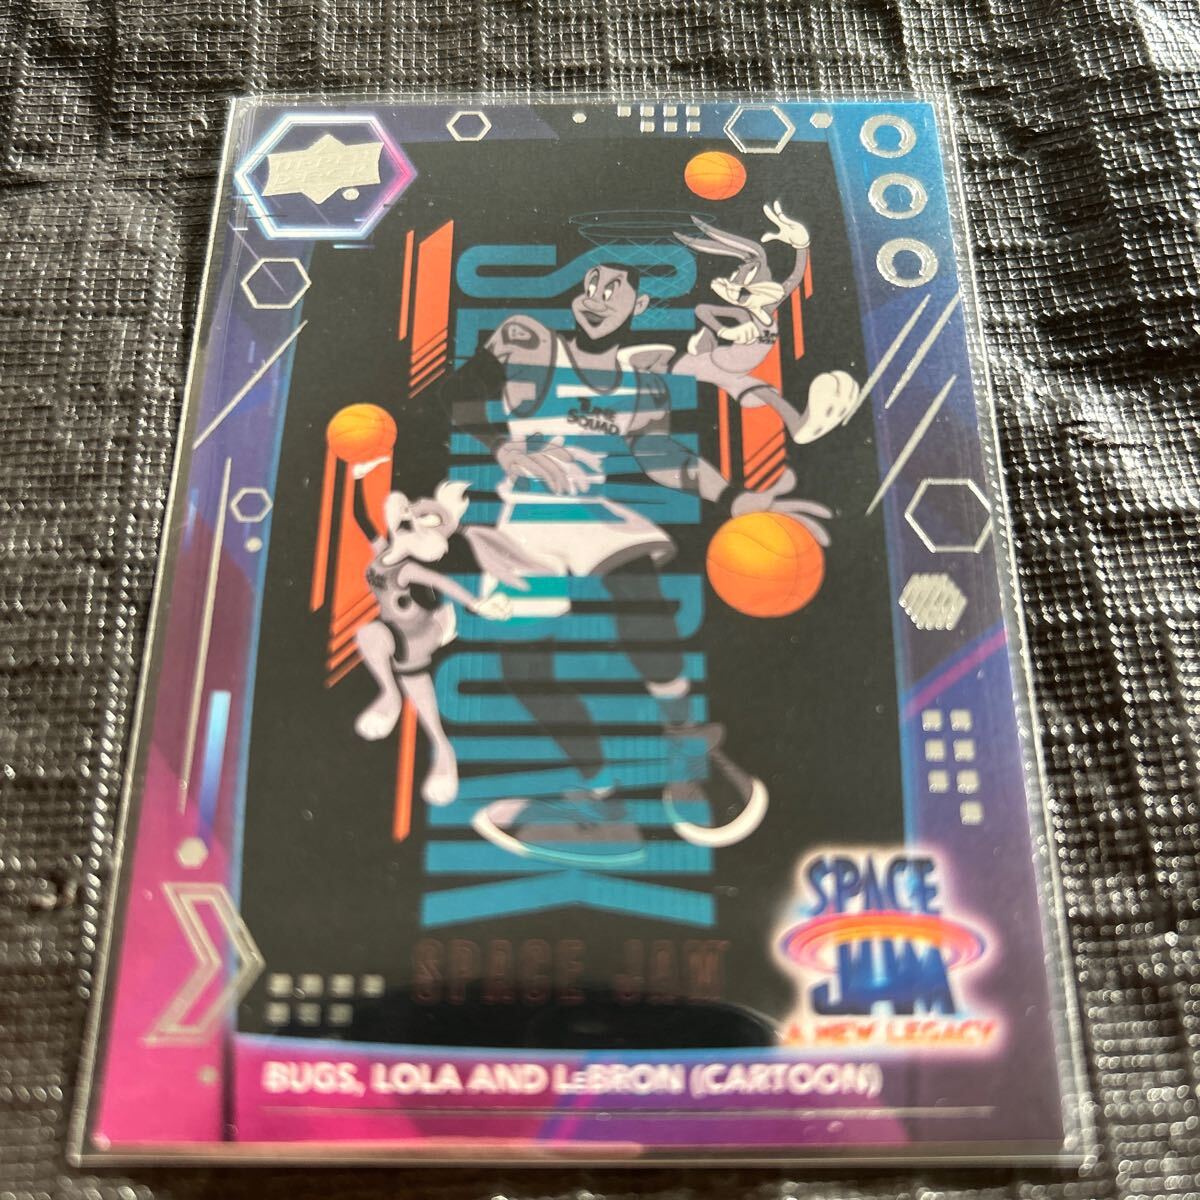 2021 UpperDeck Space Jam A New Legacy Lebron James 他10カード　レブロンジェームス　ロスアンゼルスレイカーズ_画像2